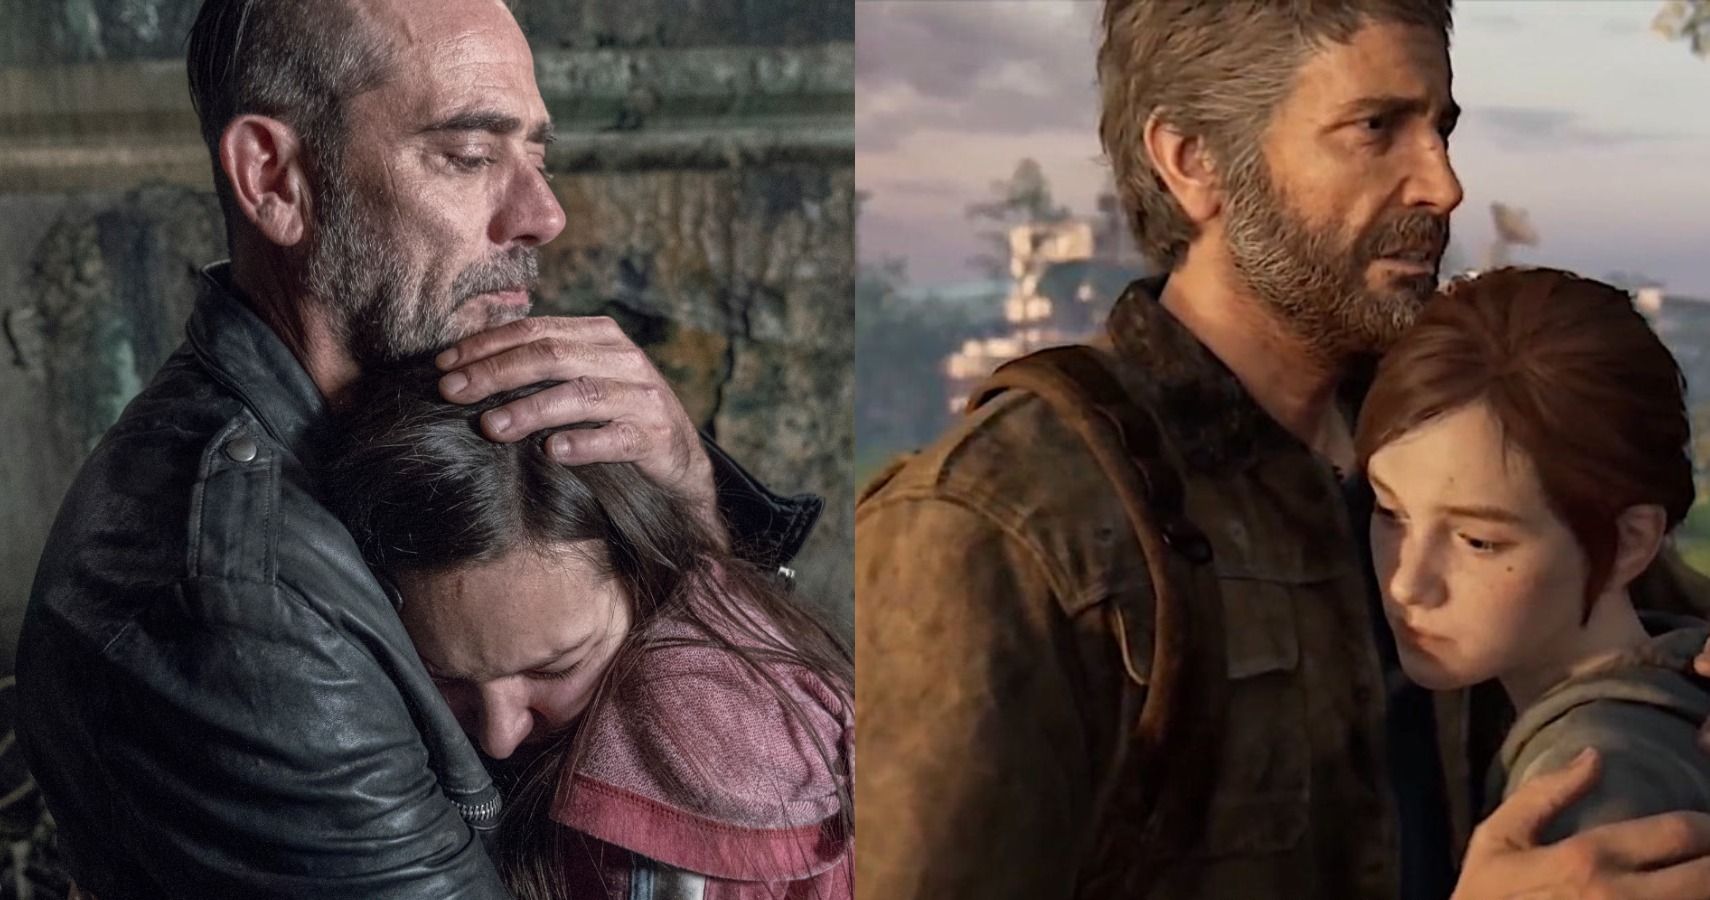 HBO's The Last Of Us: Why It's Perfectly Cast (& Better Alternatives)